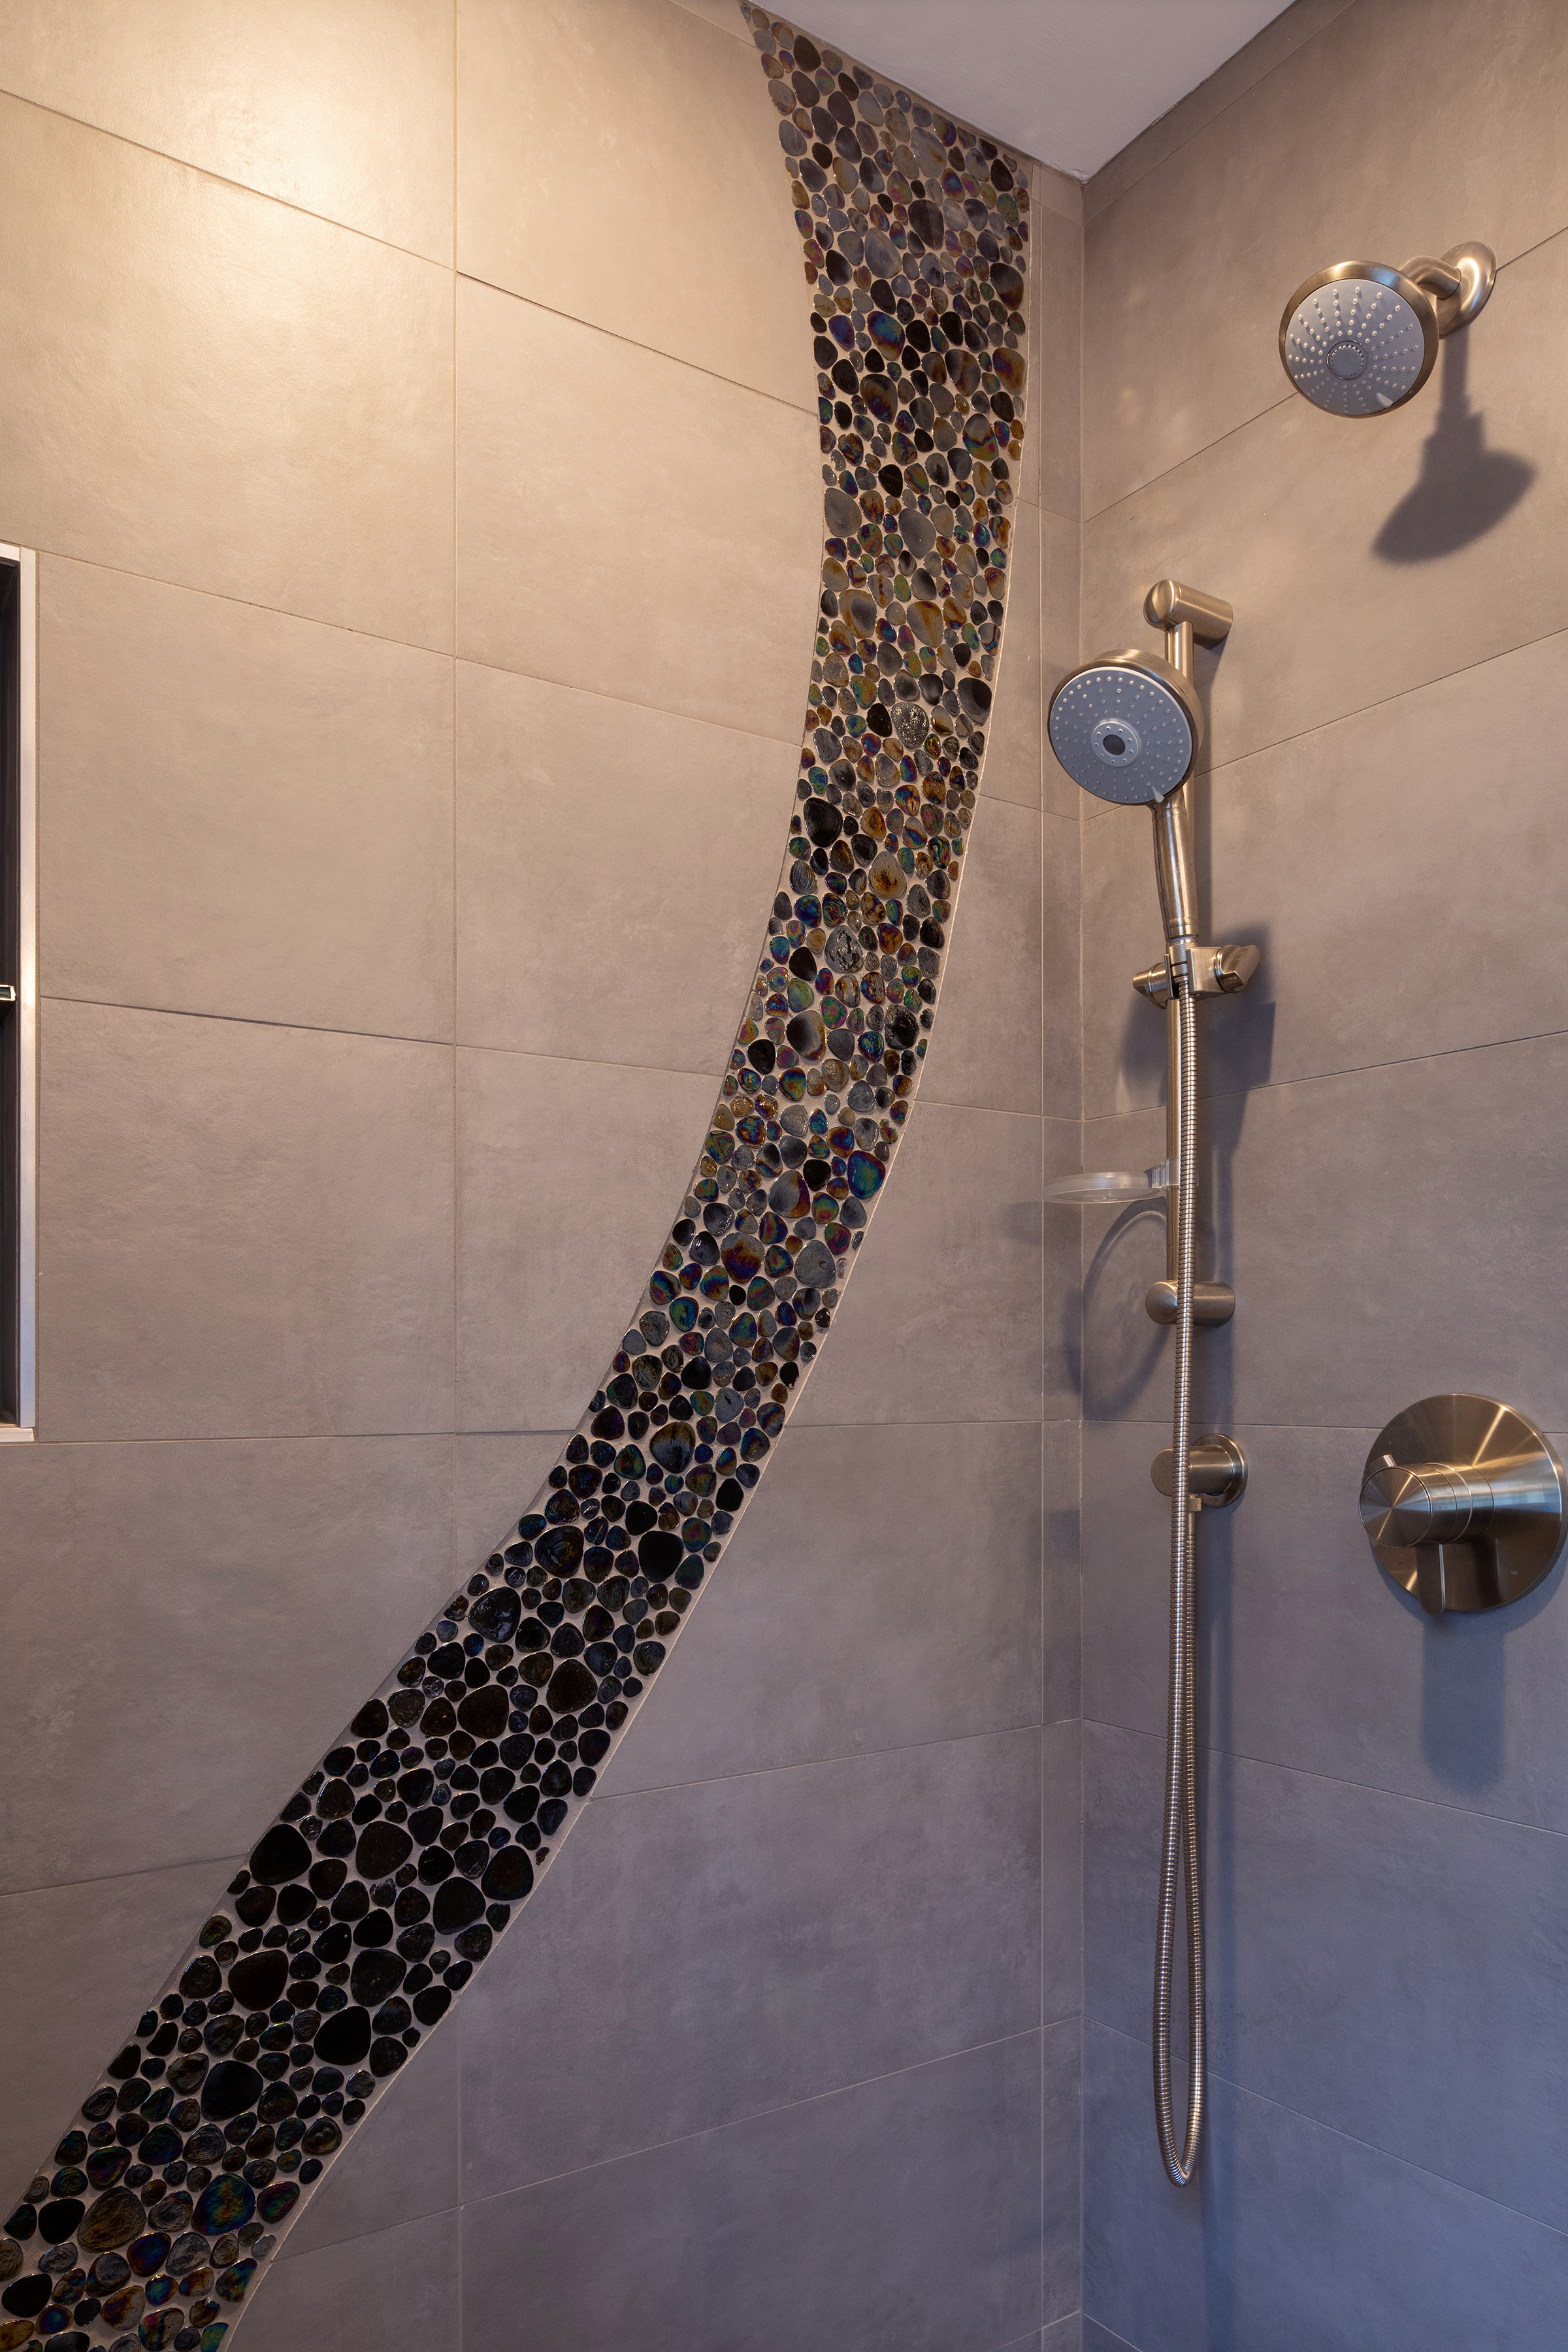 Curbless, accessible shower with waterfall design